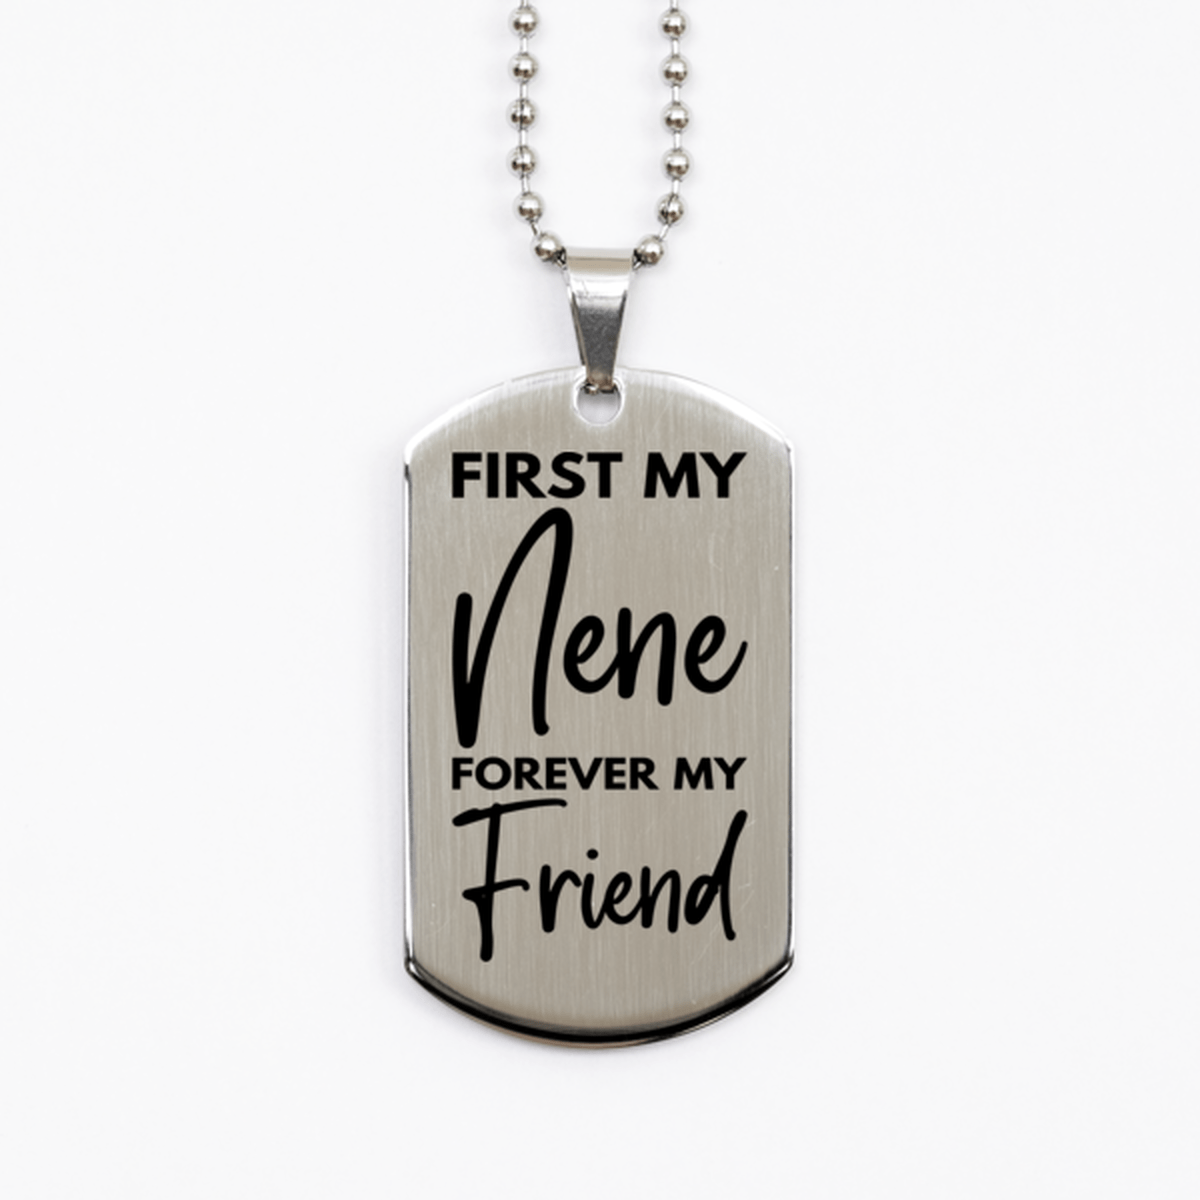 Inspirational Nene Silver Dog Tag Necklace, First My Nene Forever My Friend, Best Birthday Gifts for Nene